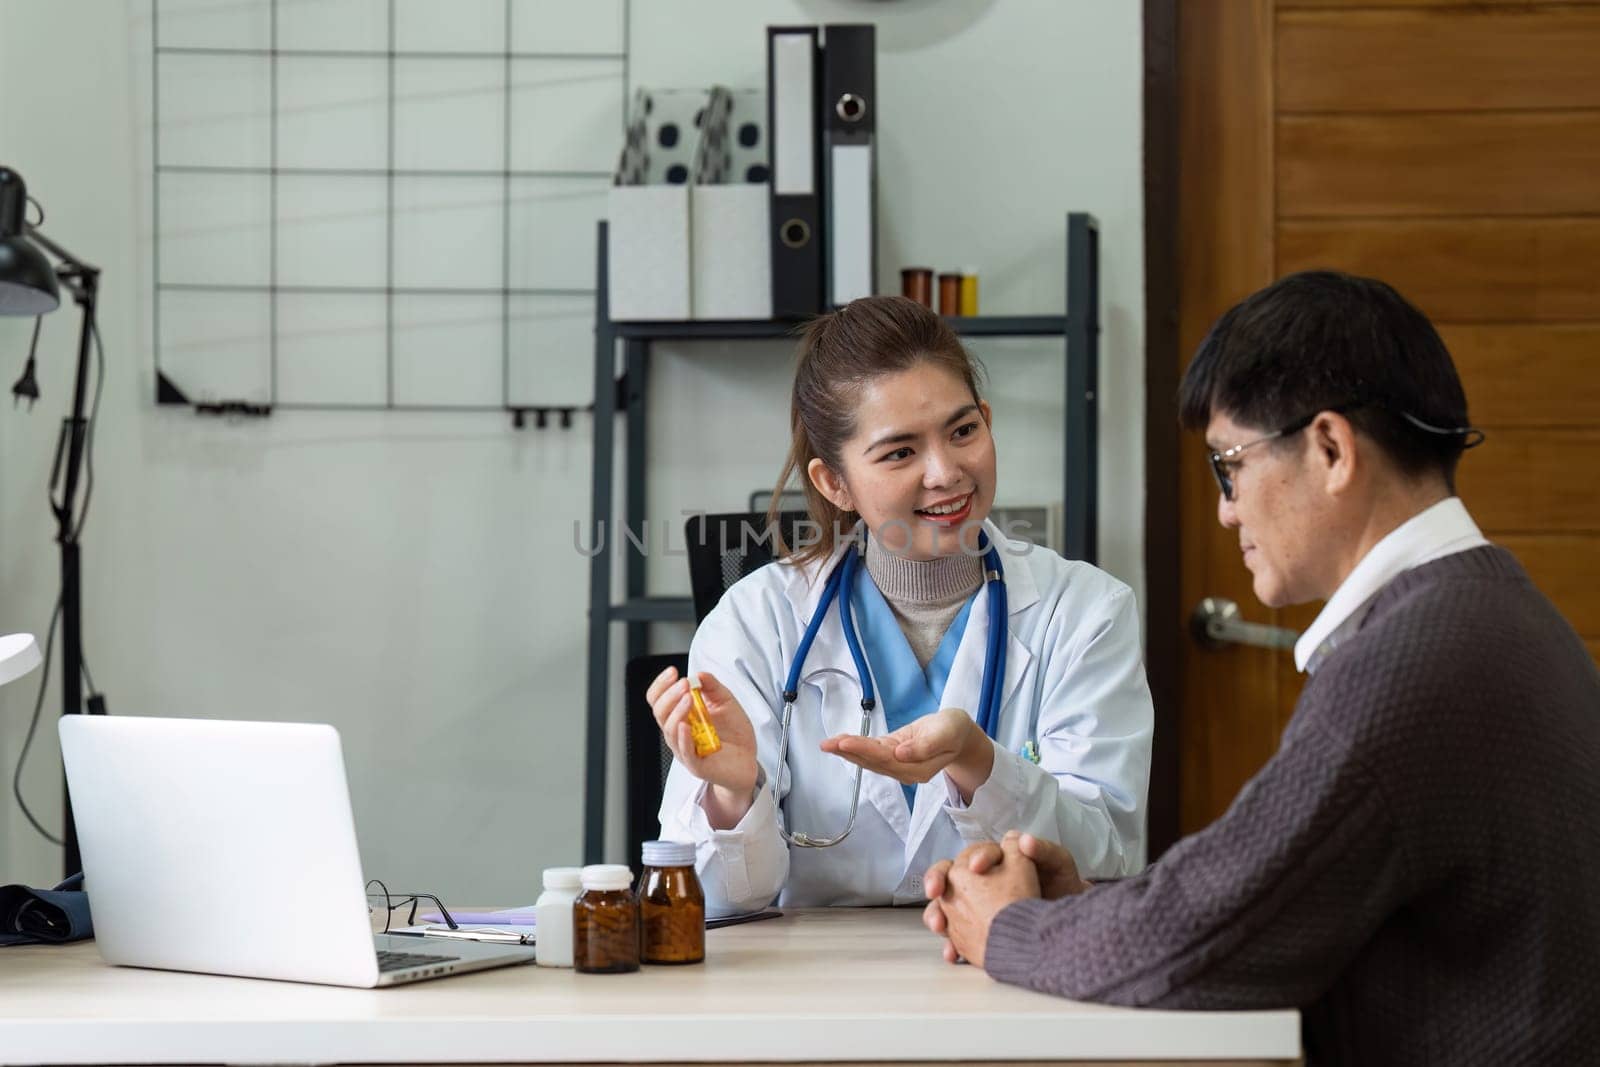 A woman doctor is talking to a man in a room. The woman is holding a bottle of pills and the man is sitting on a chair